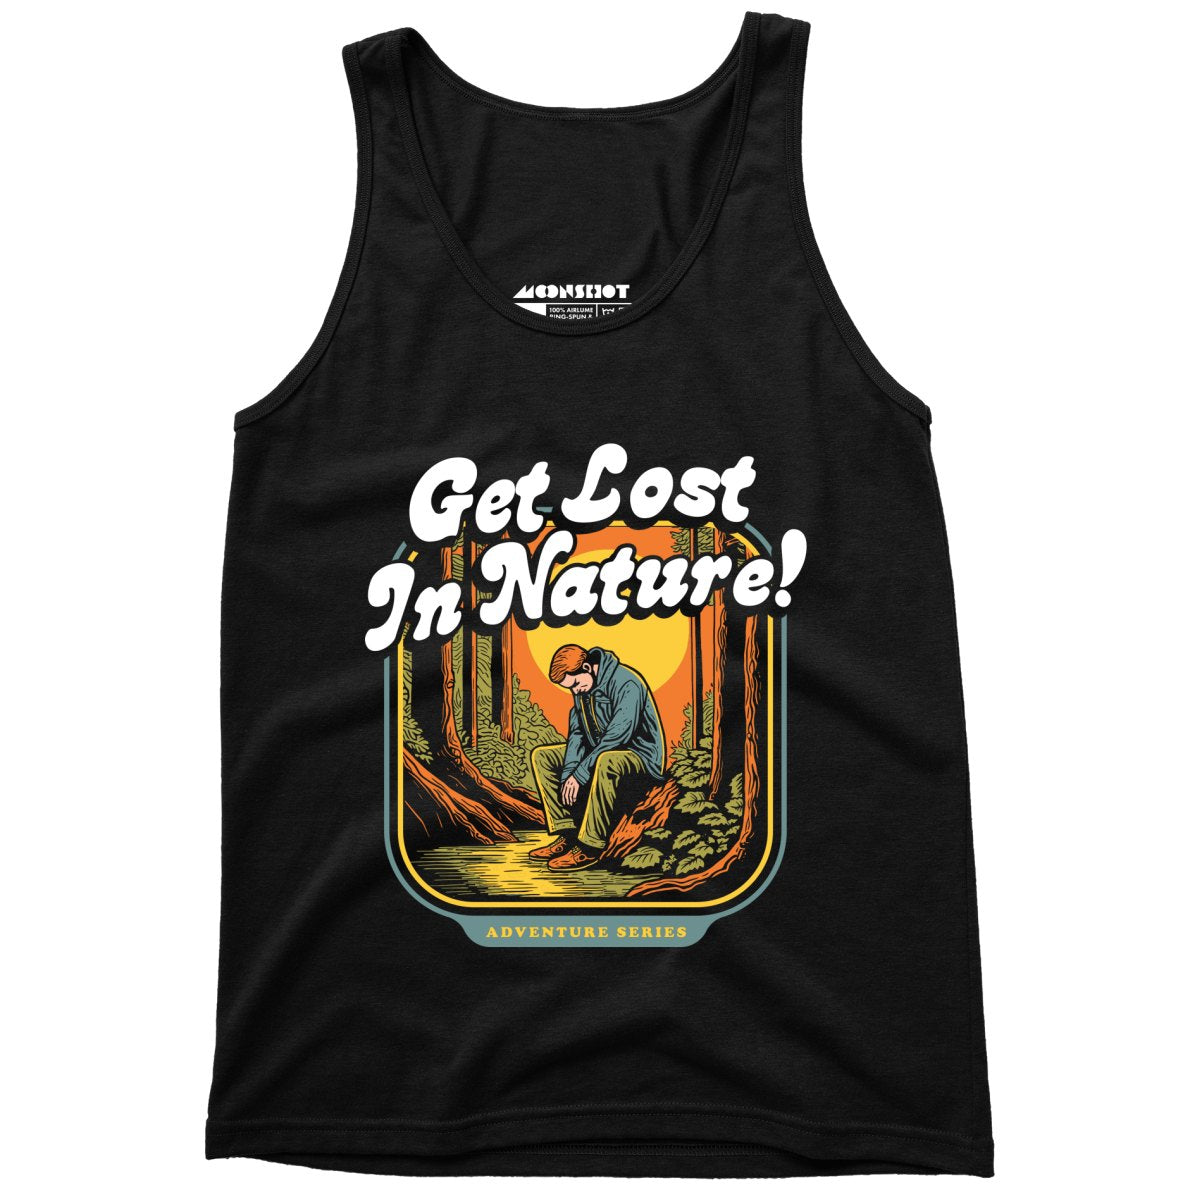 Get Lost in Nature - Unisex Tank Top